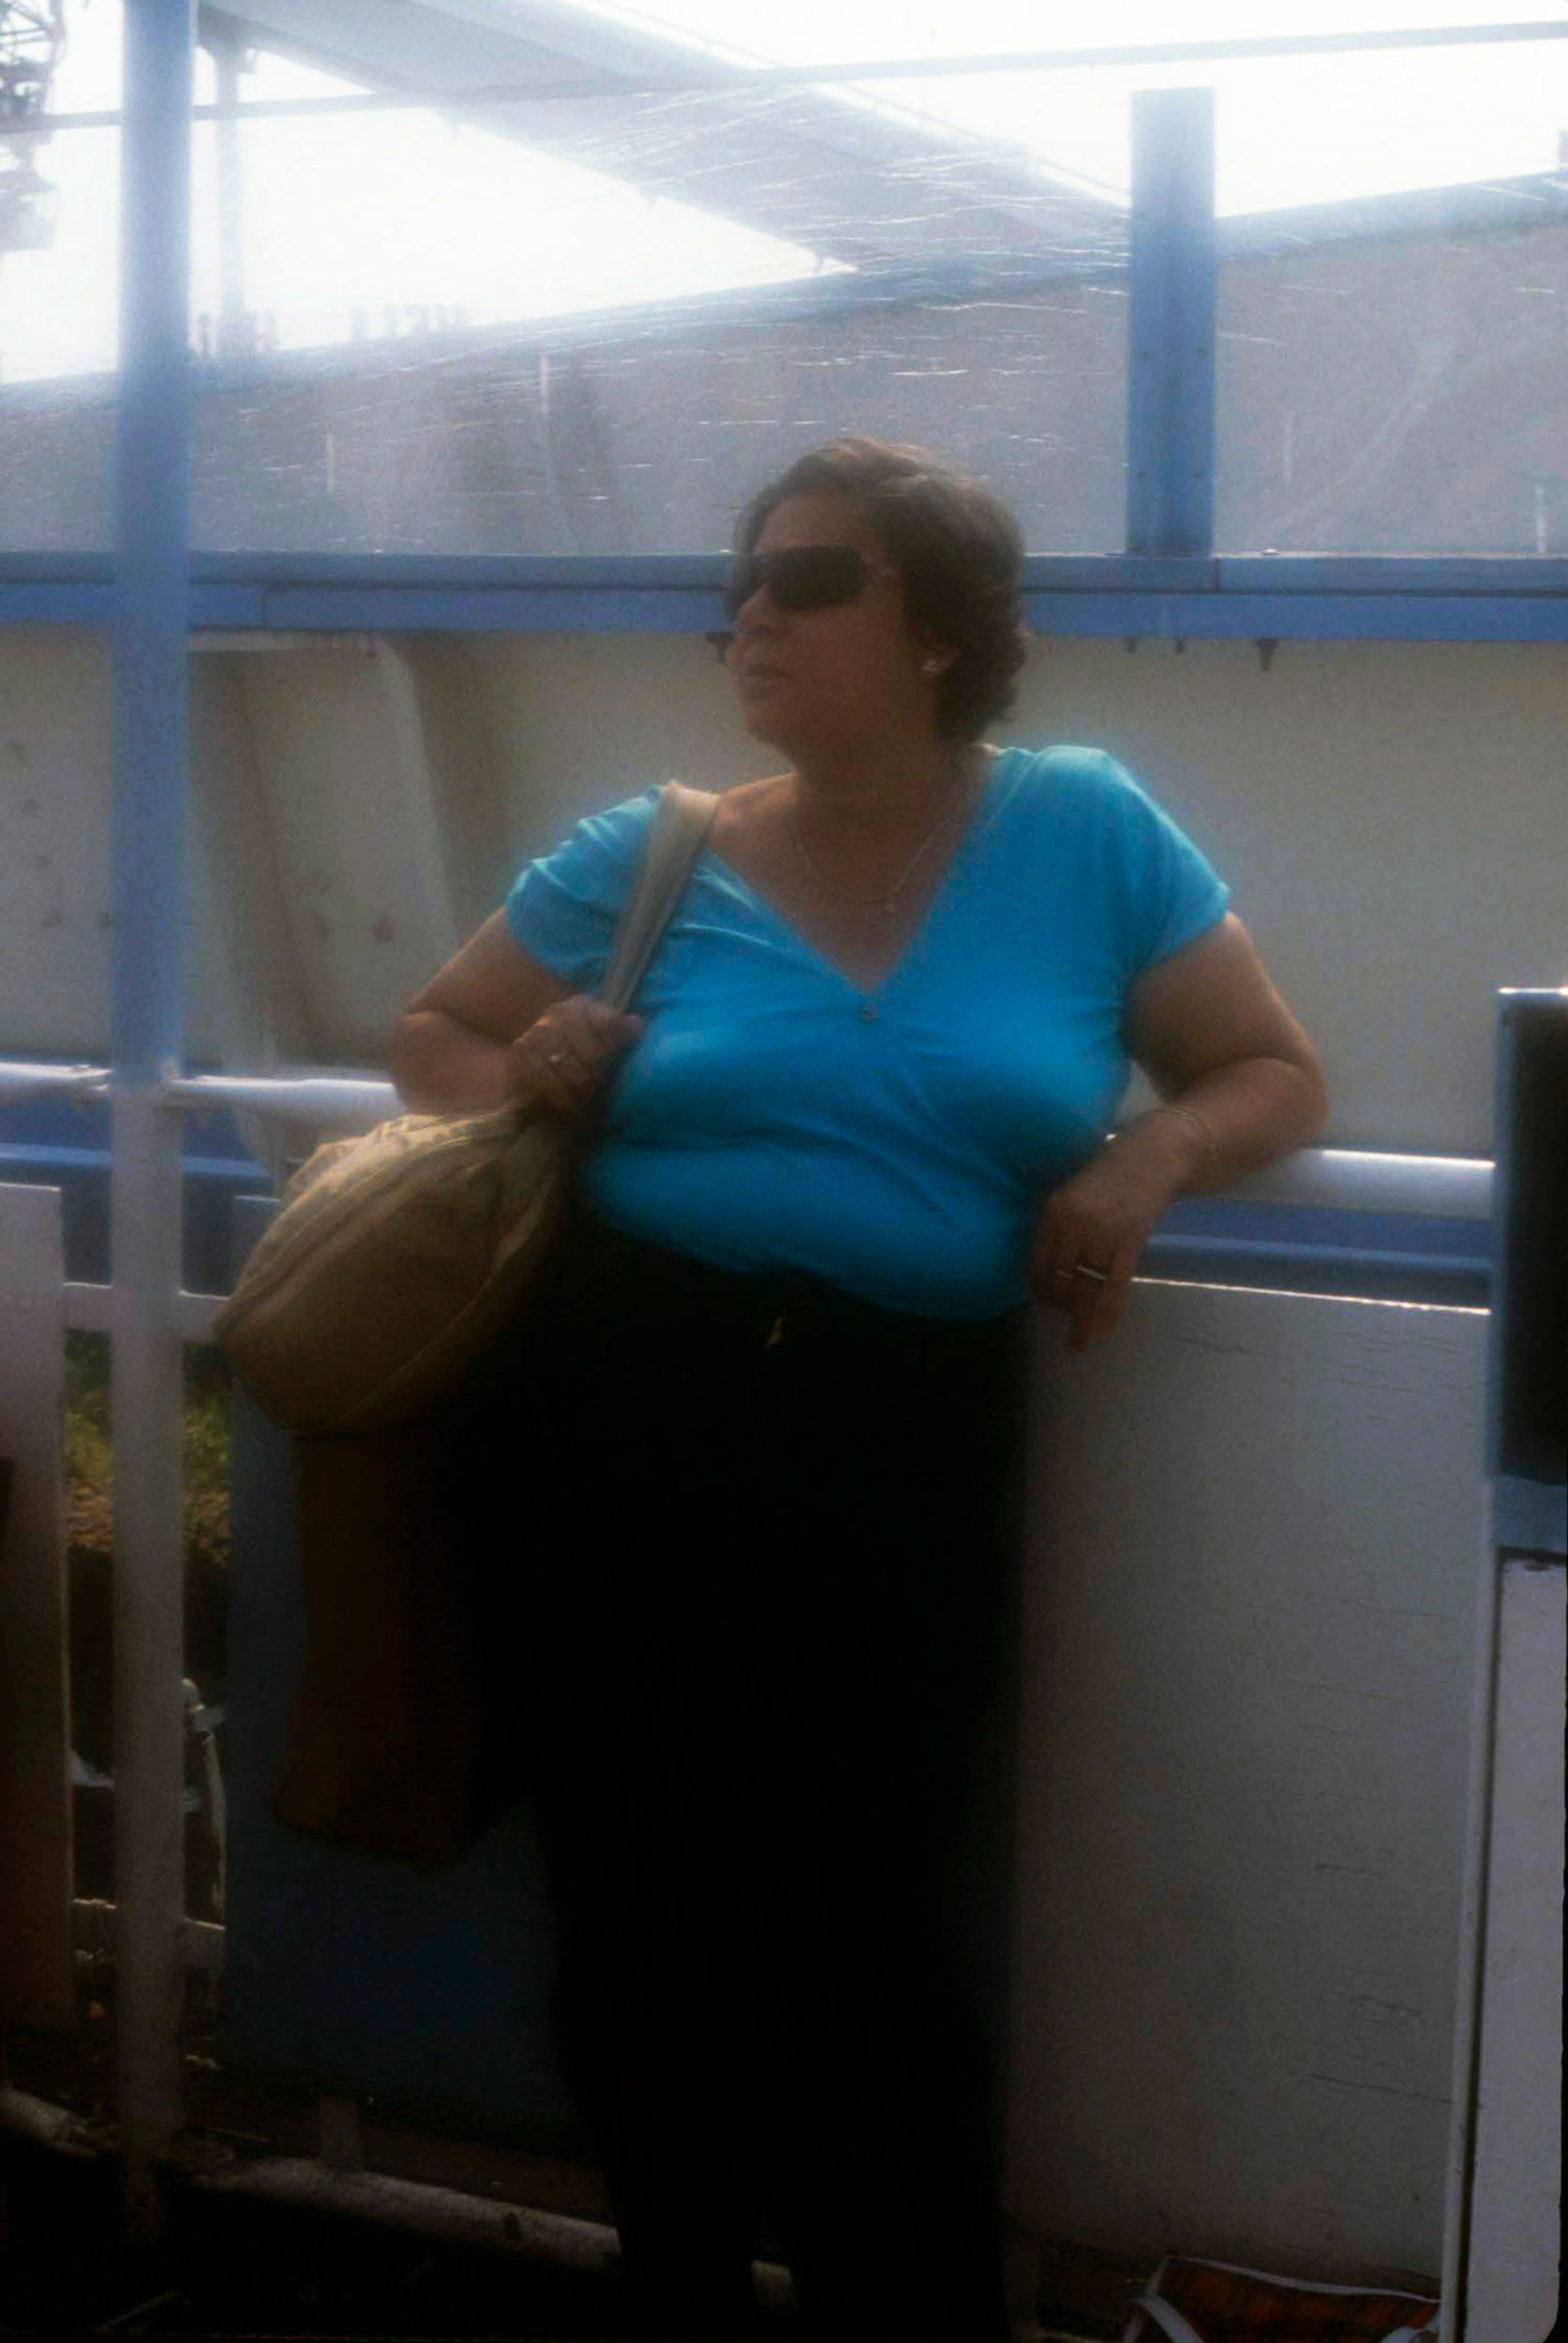 Woman with Blue Shirt / Coney Island, NYC